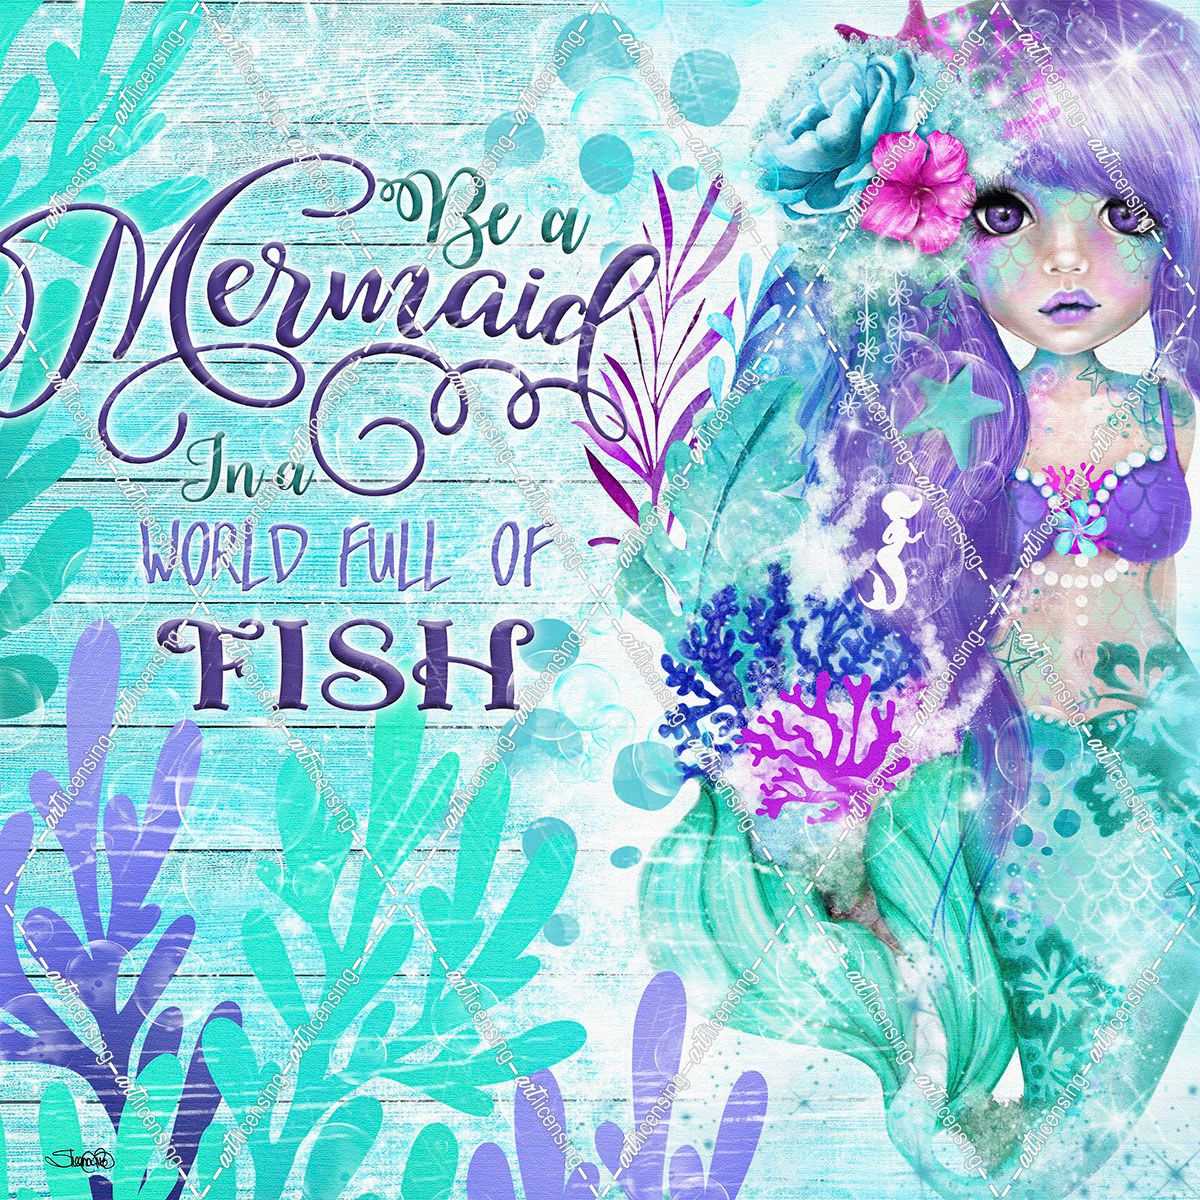 Be a Mermaid in A World full of Fish